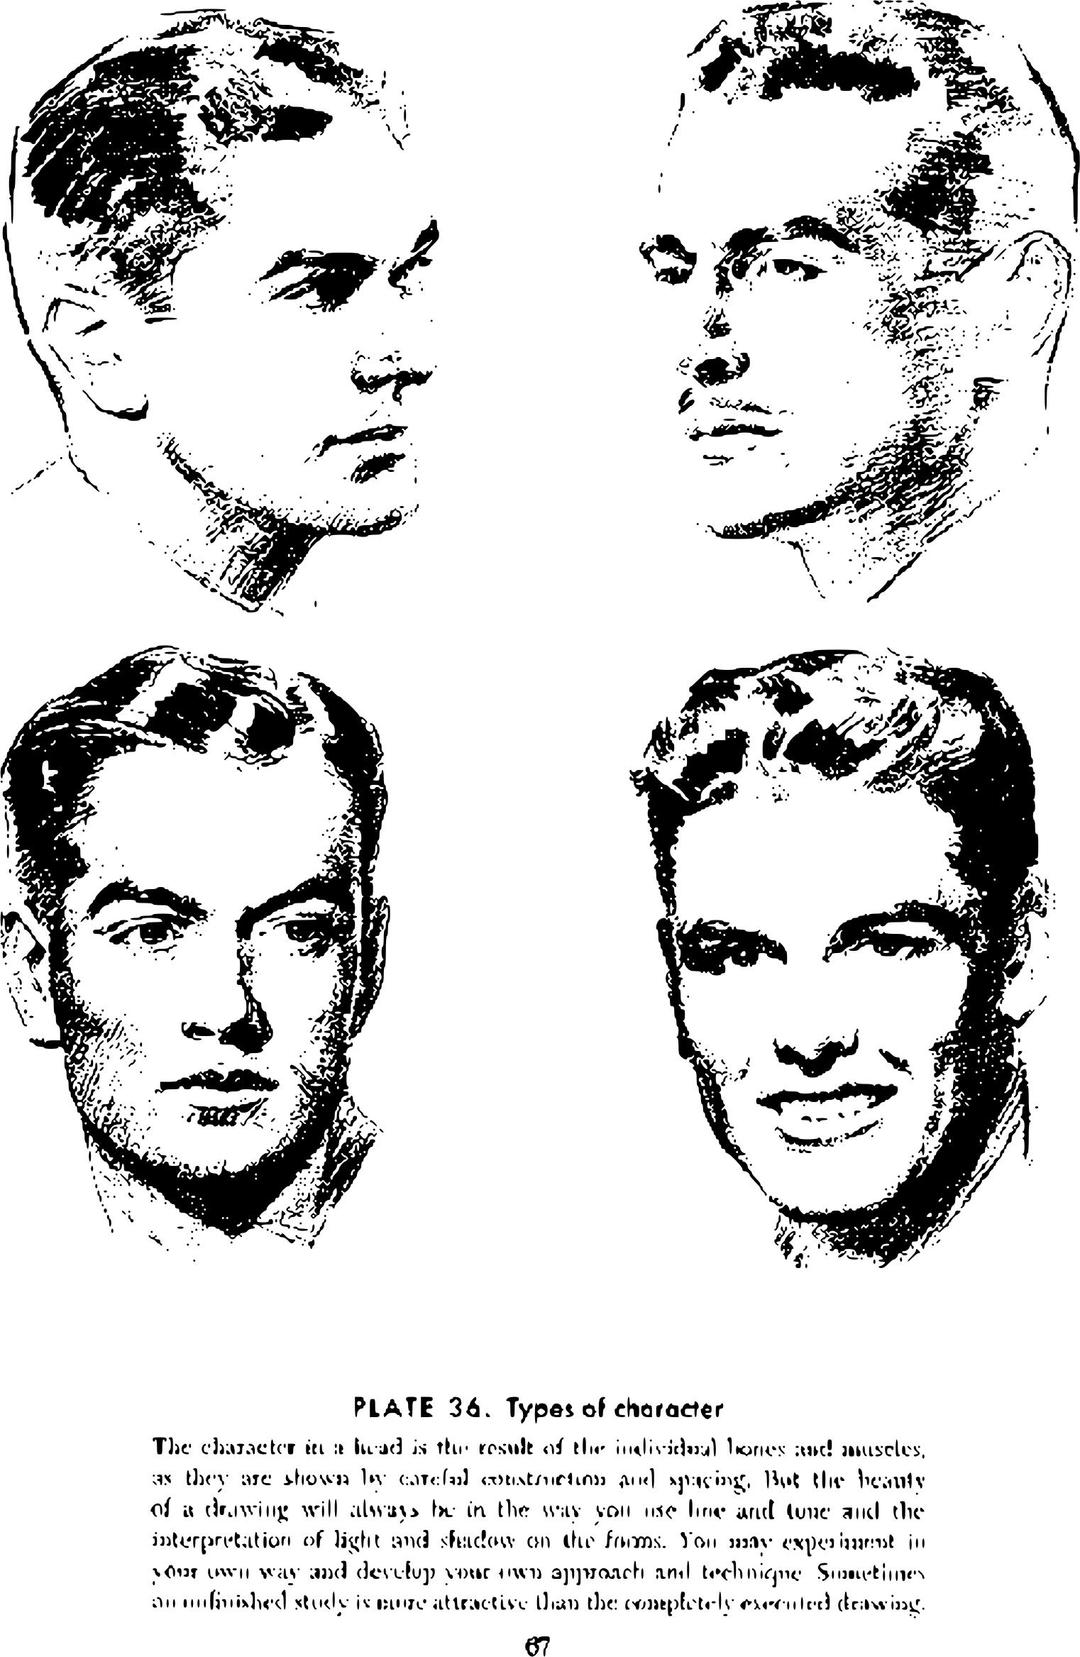 Andrew Loomis Drawing the Head and Hands (potrace) 62 png transparent